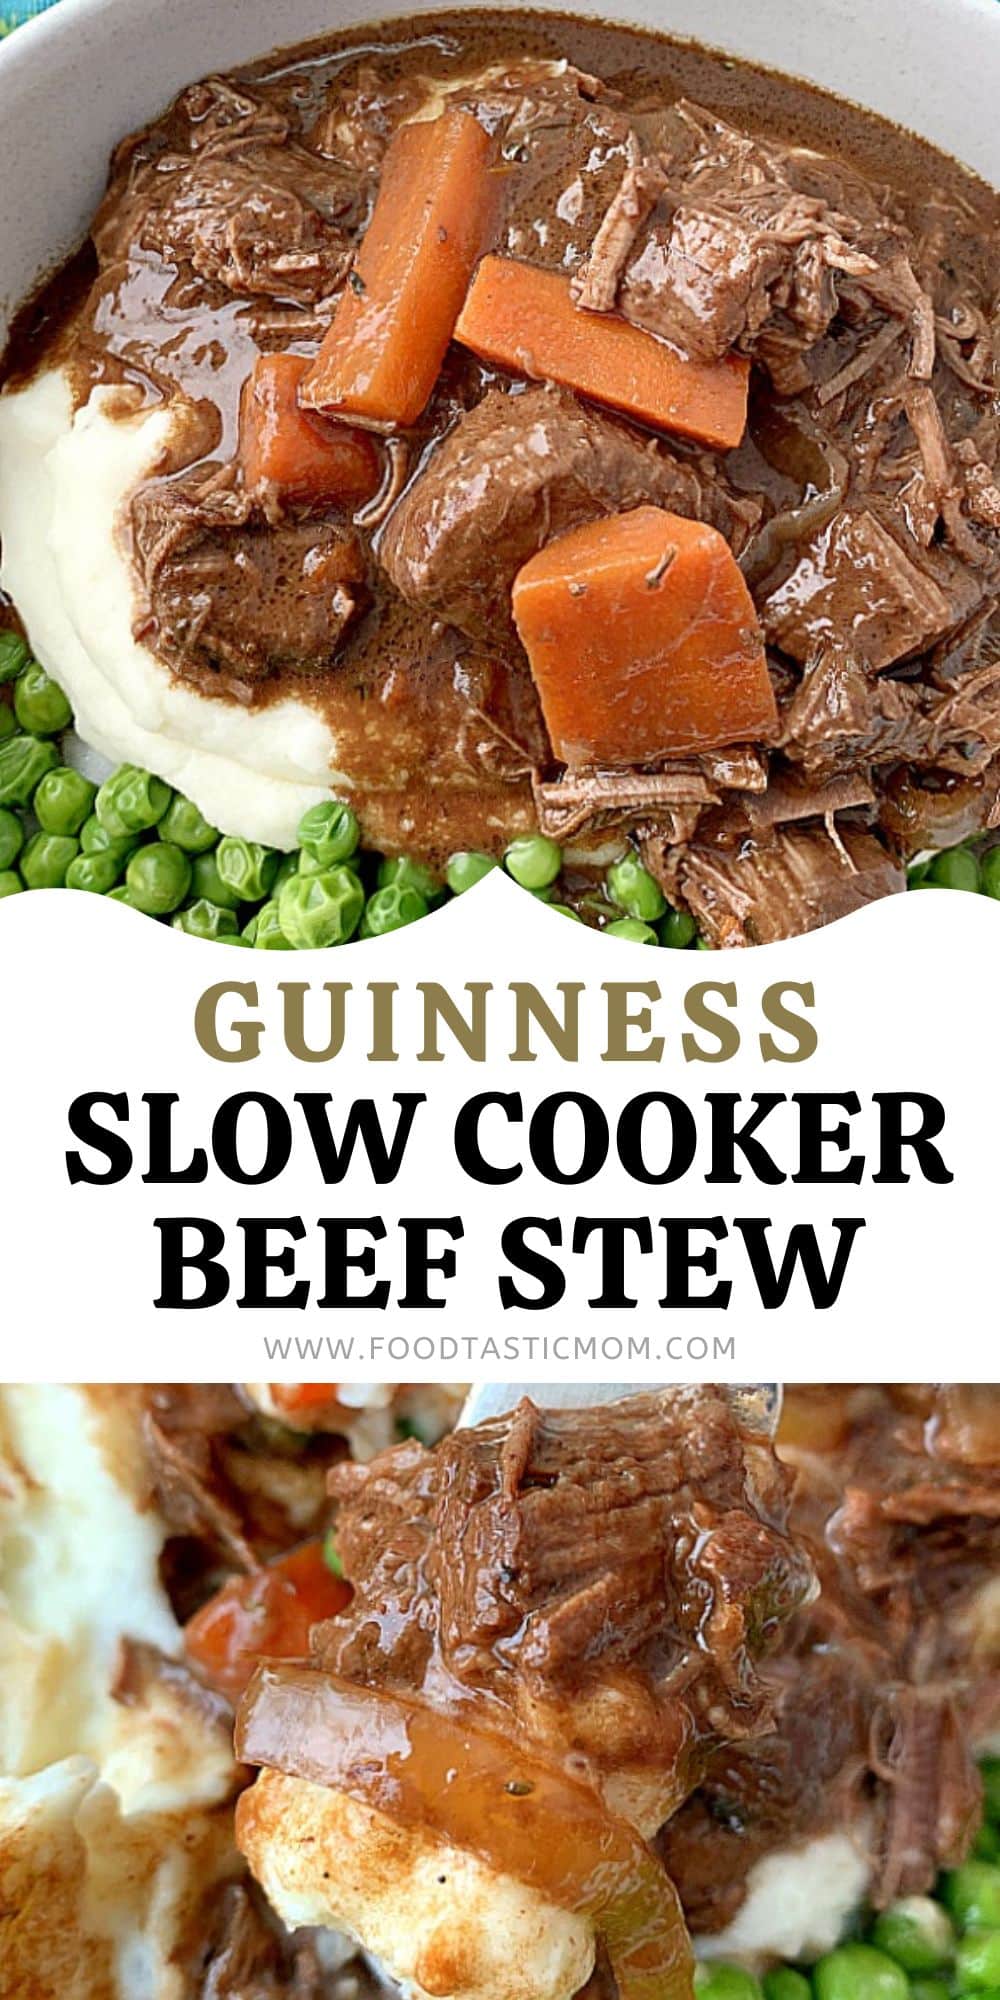 Slow Cooker Guinness Beef Stew will have you coming back for seconds even if it's not St. Patrick's Day. The stew is hearty, savory and a little sweet with a secret ingredient you might not guess. via @foodtasticmom